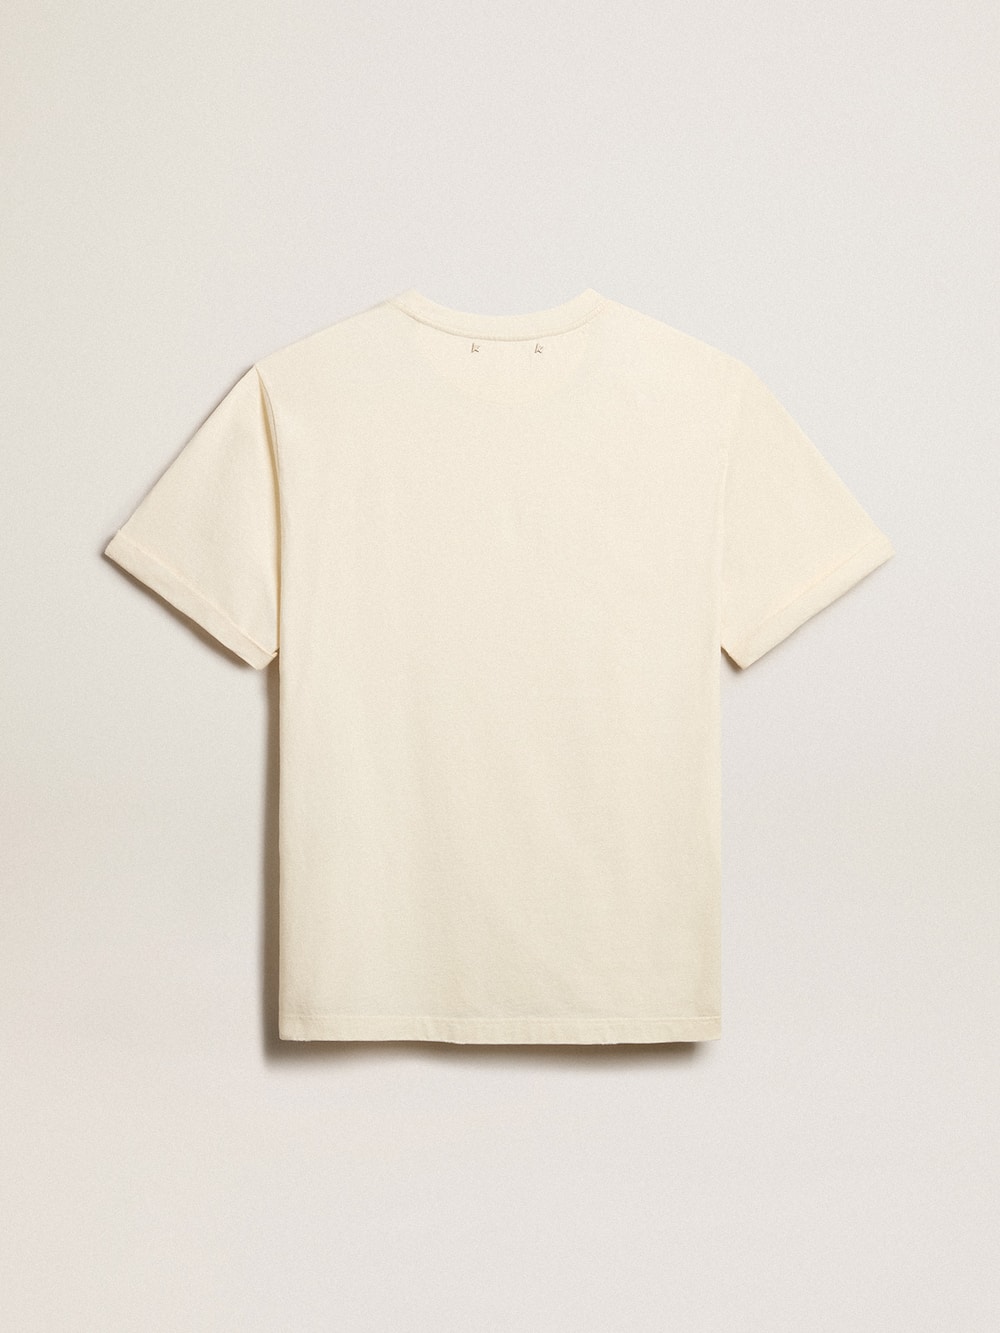 Golden Goose - Men’s cotton T-shirt in aged white with embroidered pocket in 